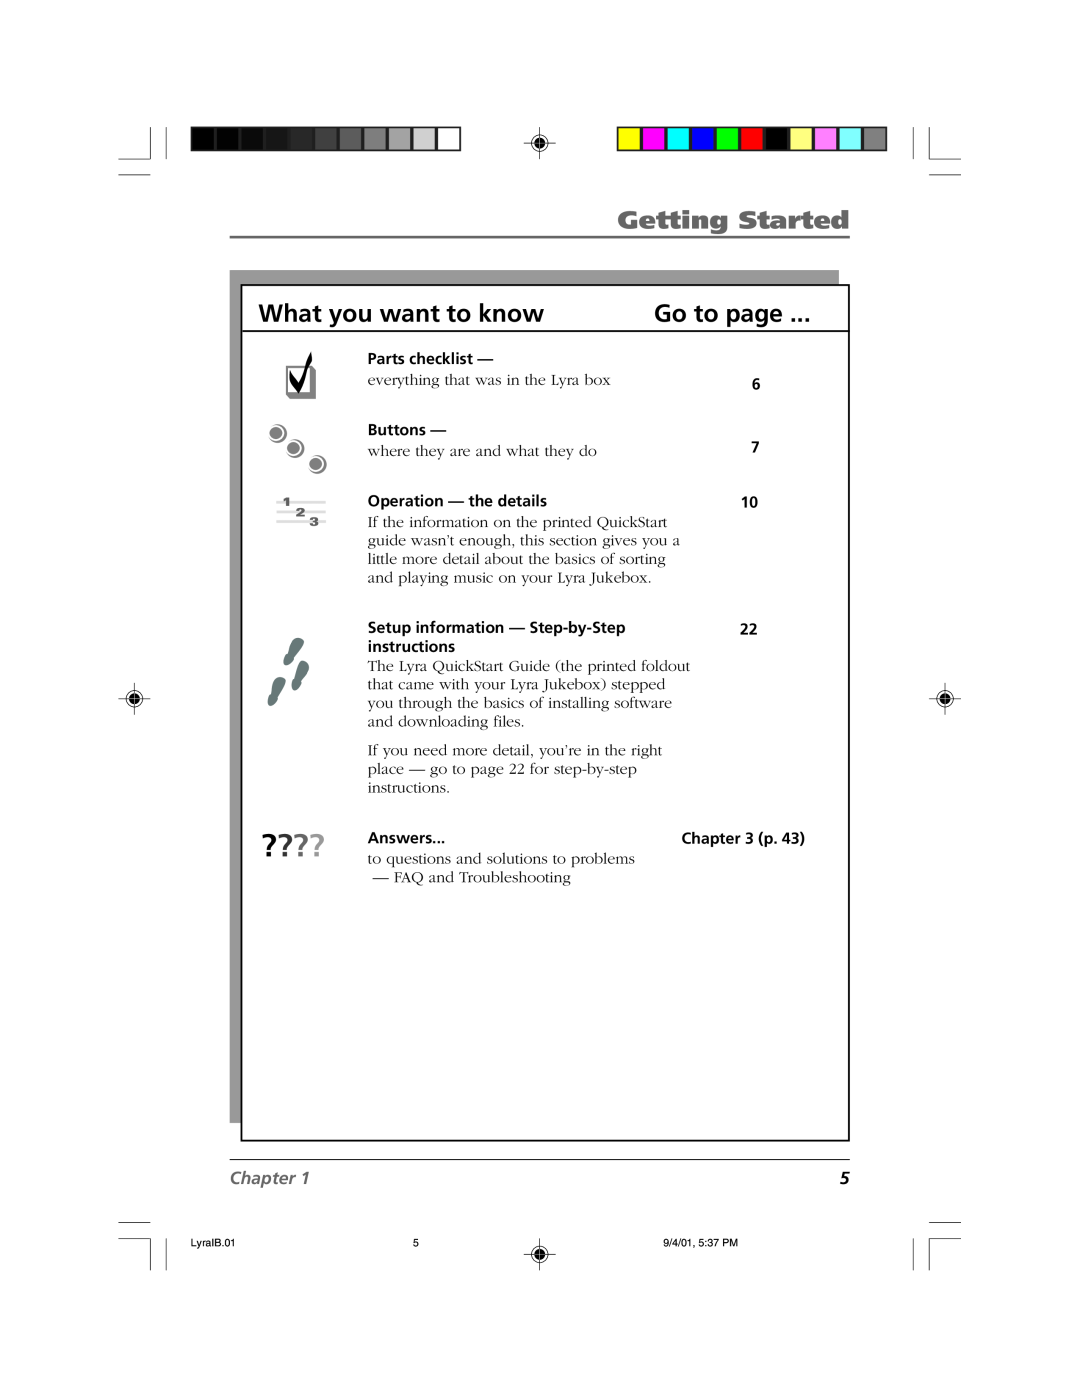 RCA RD2800 manual What you want to know, ????, Getting Started, Go to page, Chapter, Parts checklist, Buttons, instructions 